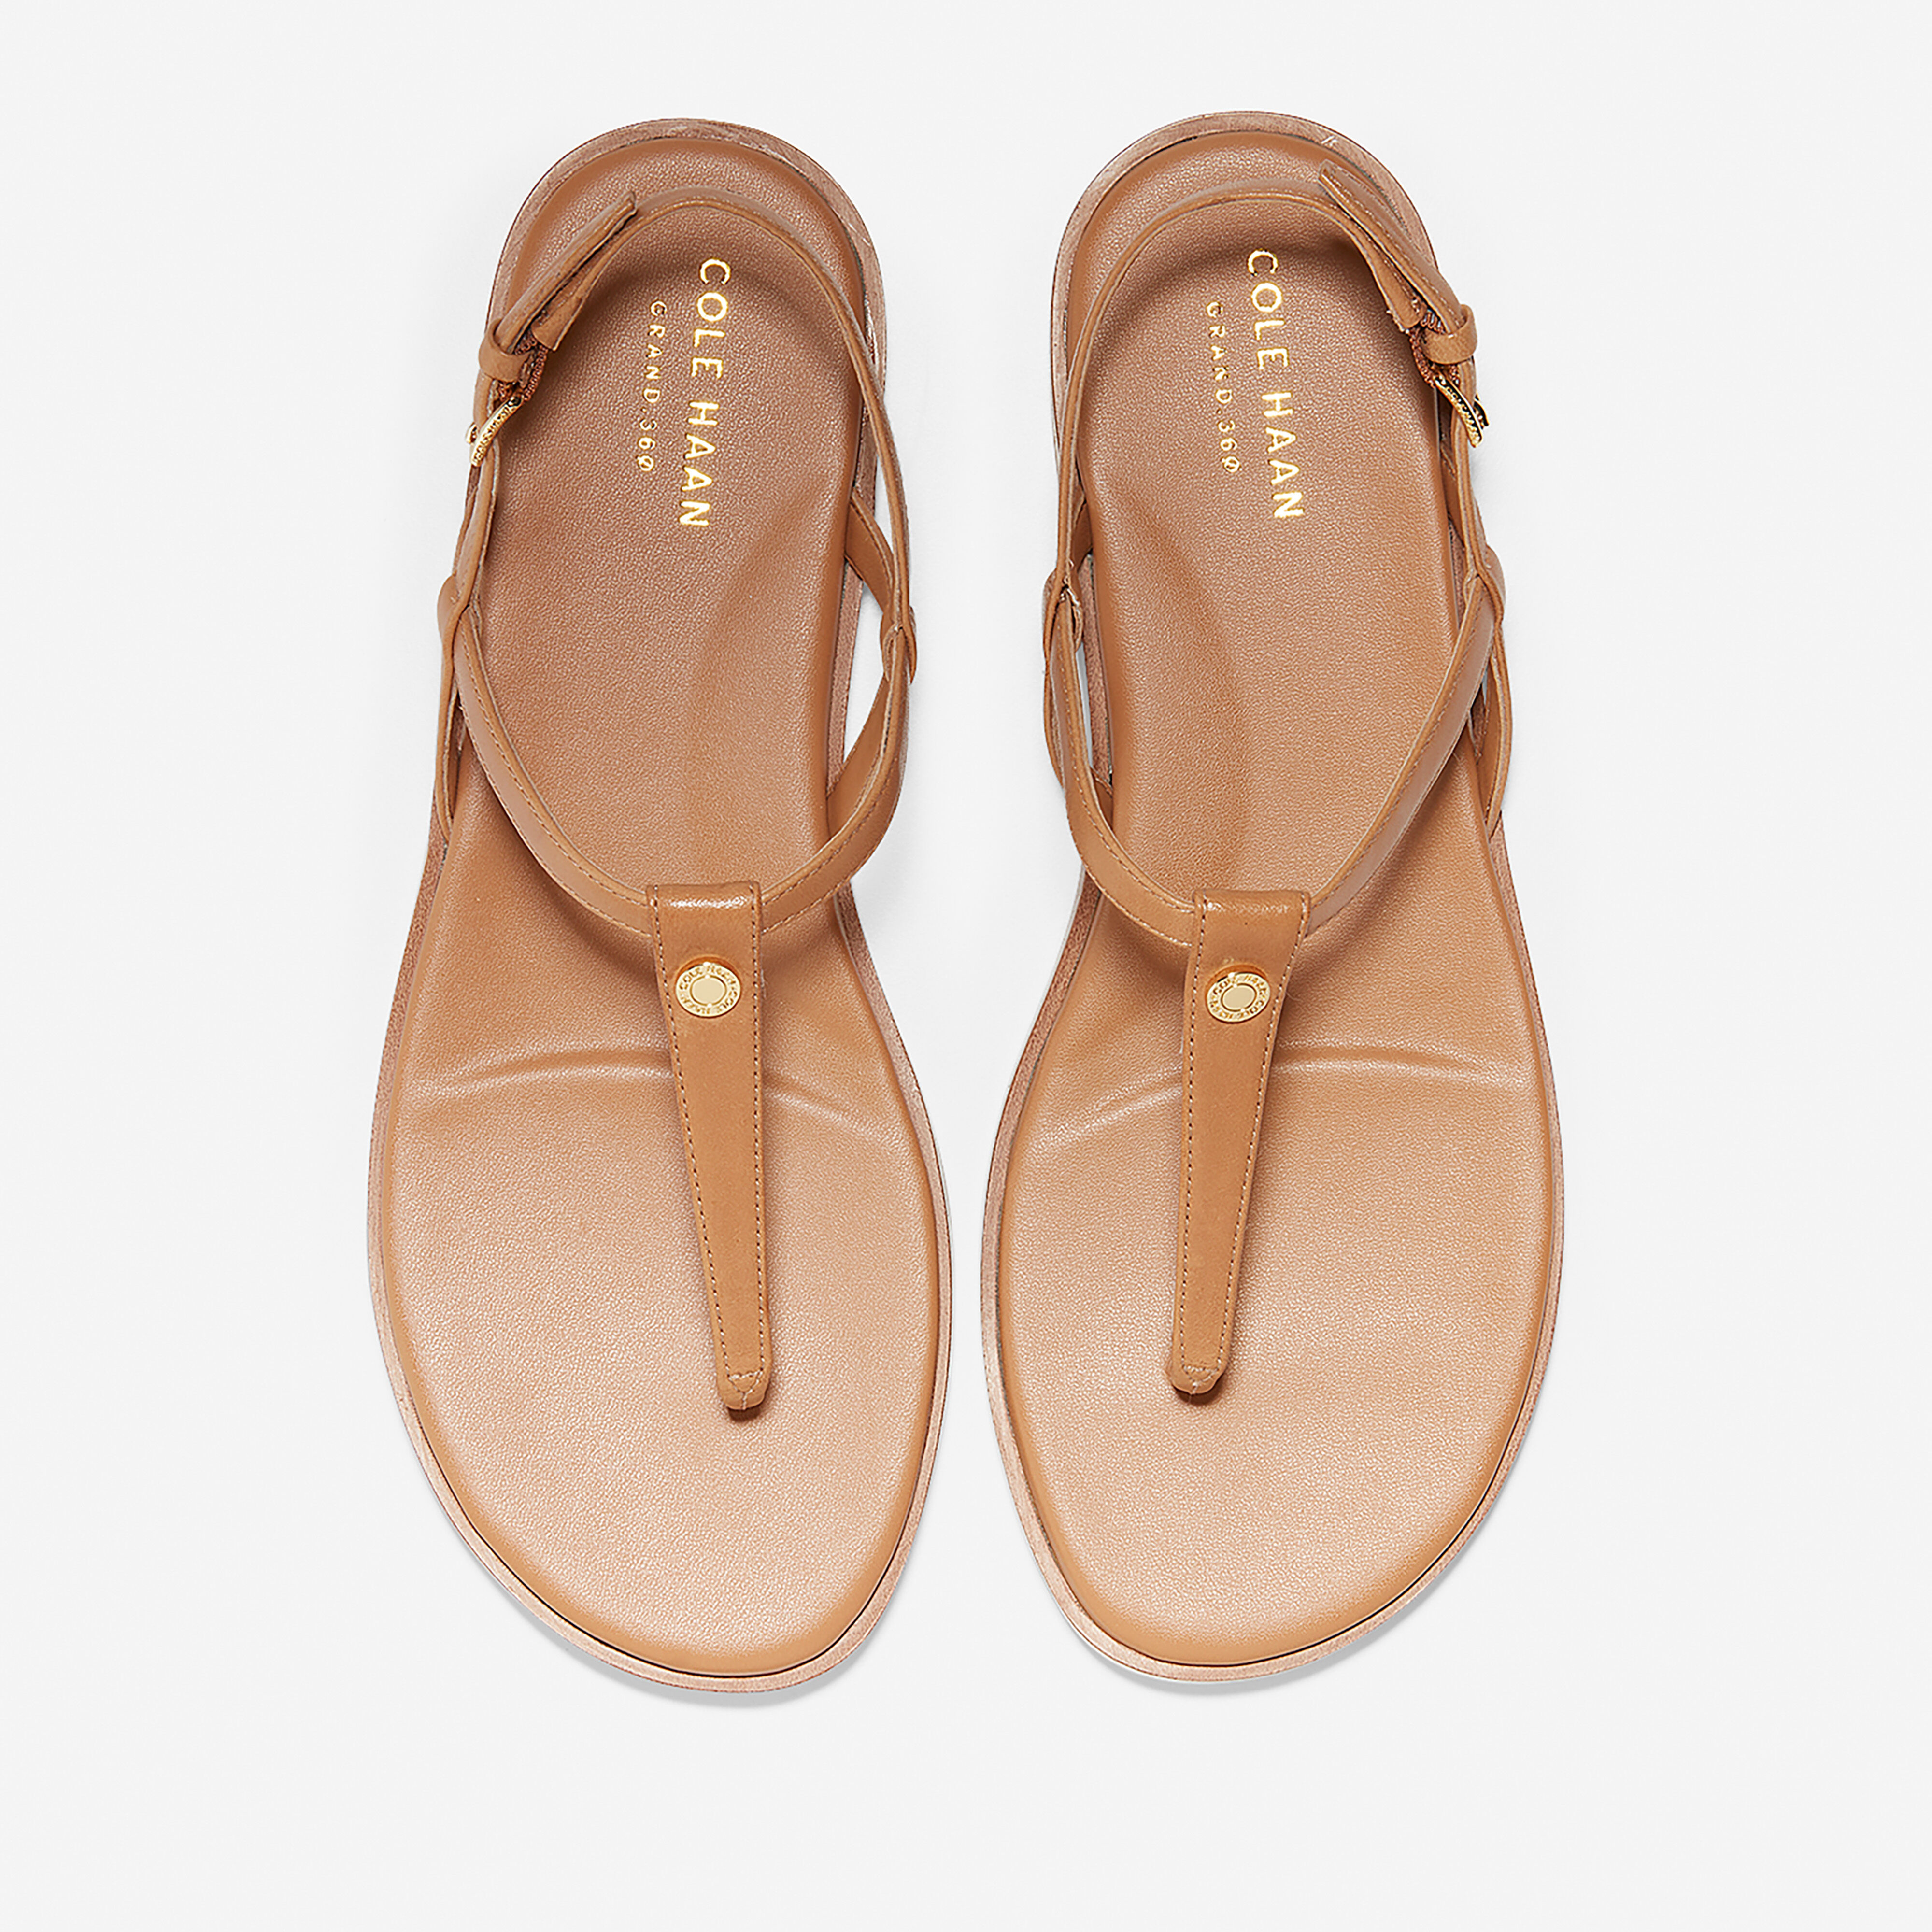 Flora Thong Sandal in Pecan Leather 